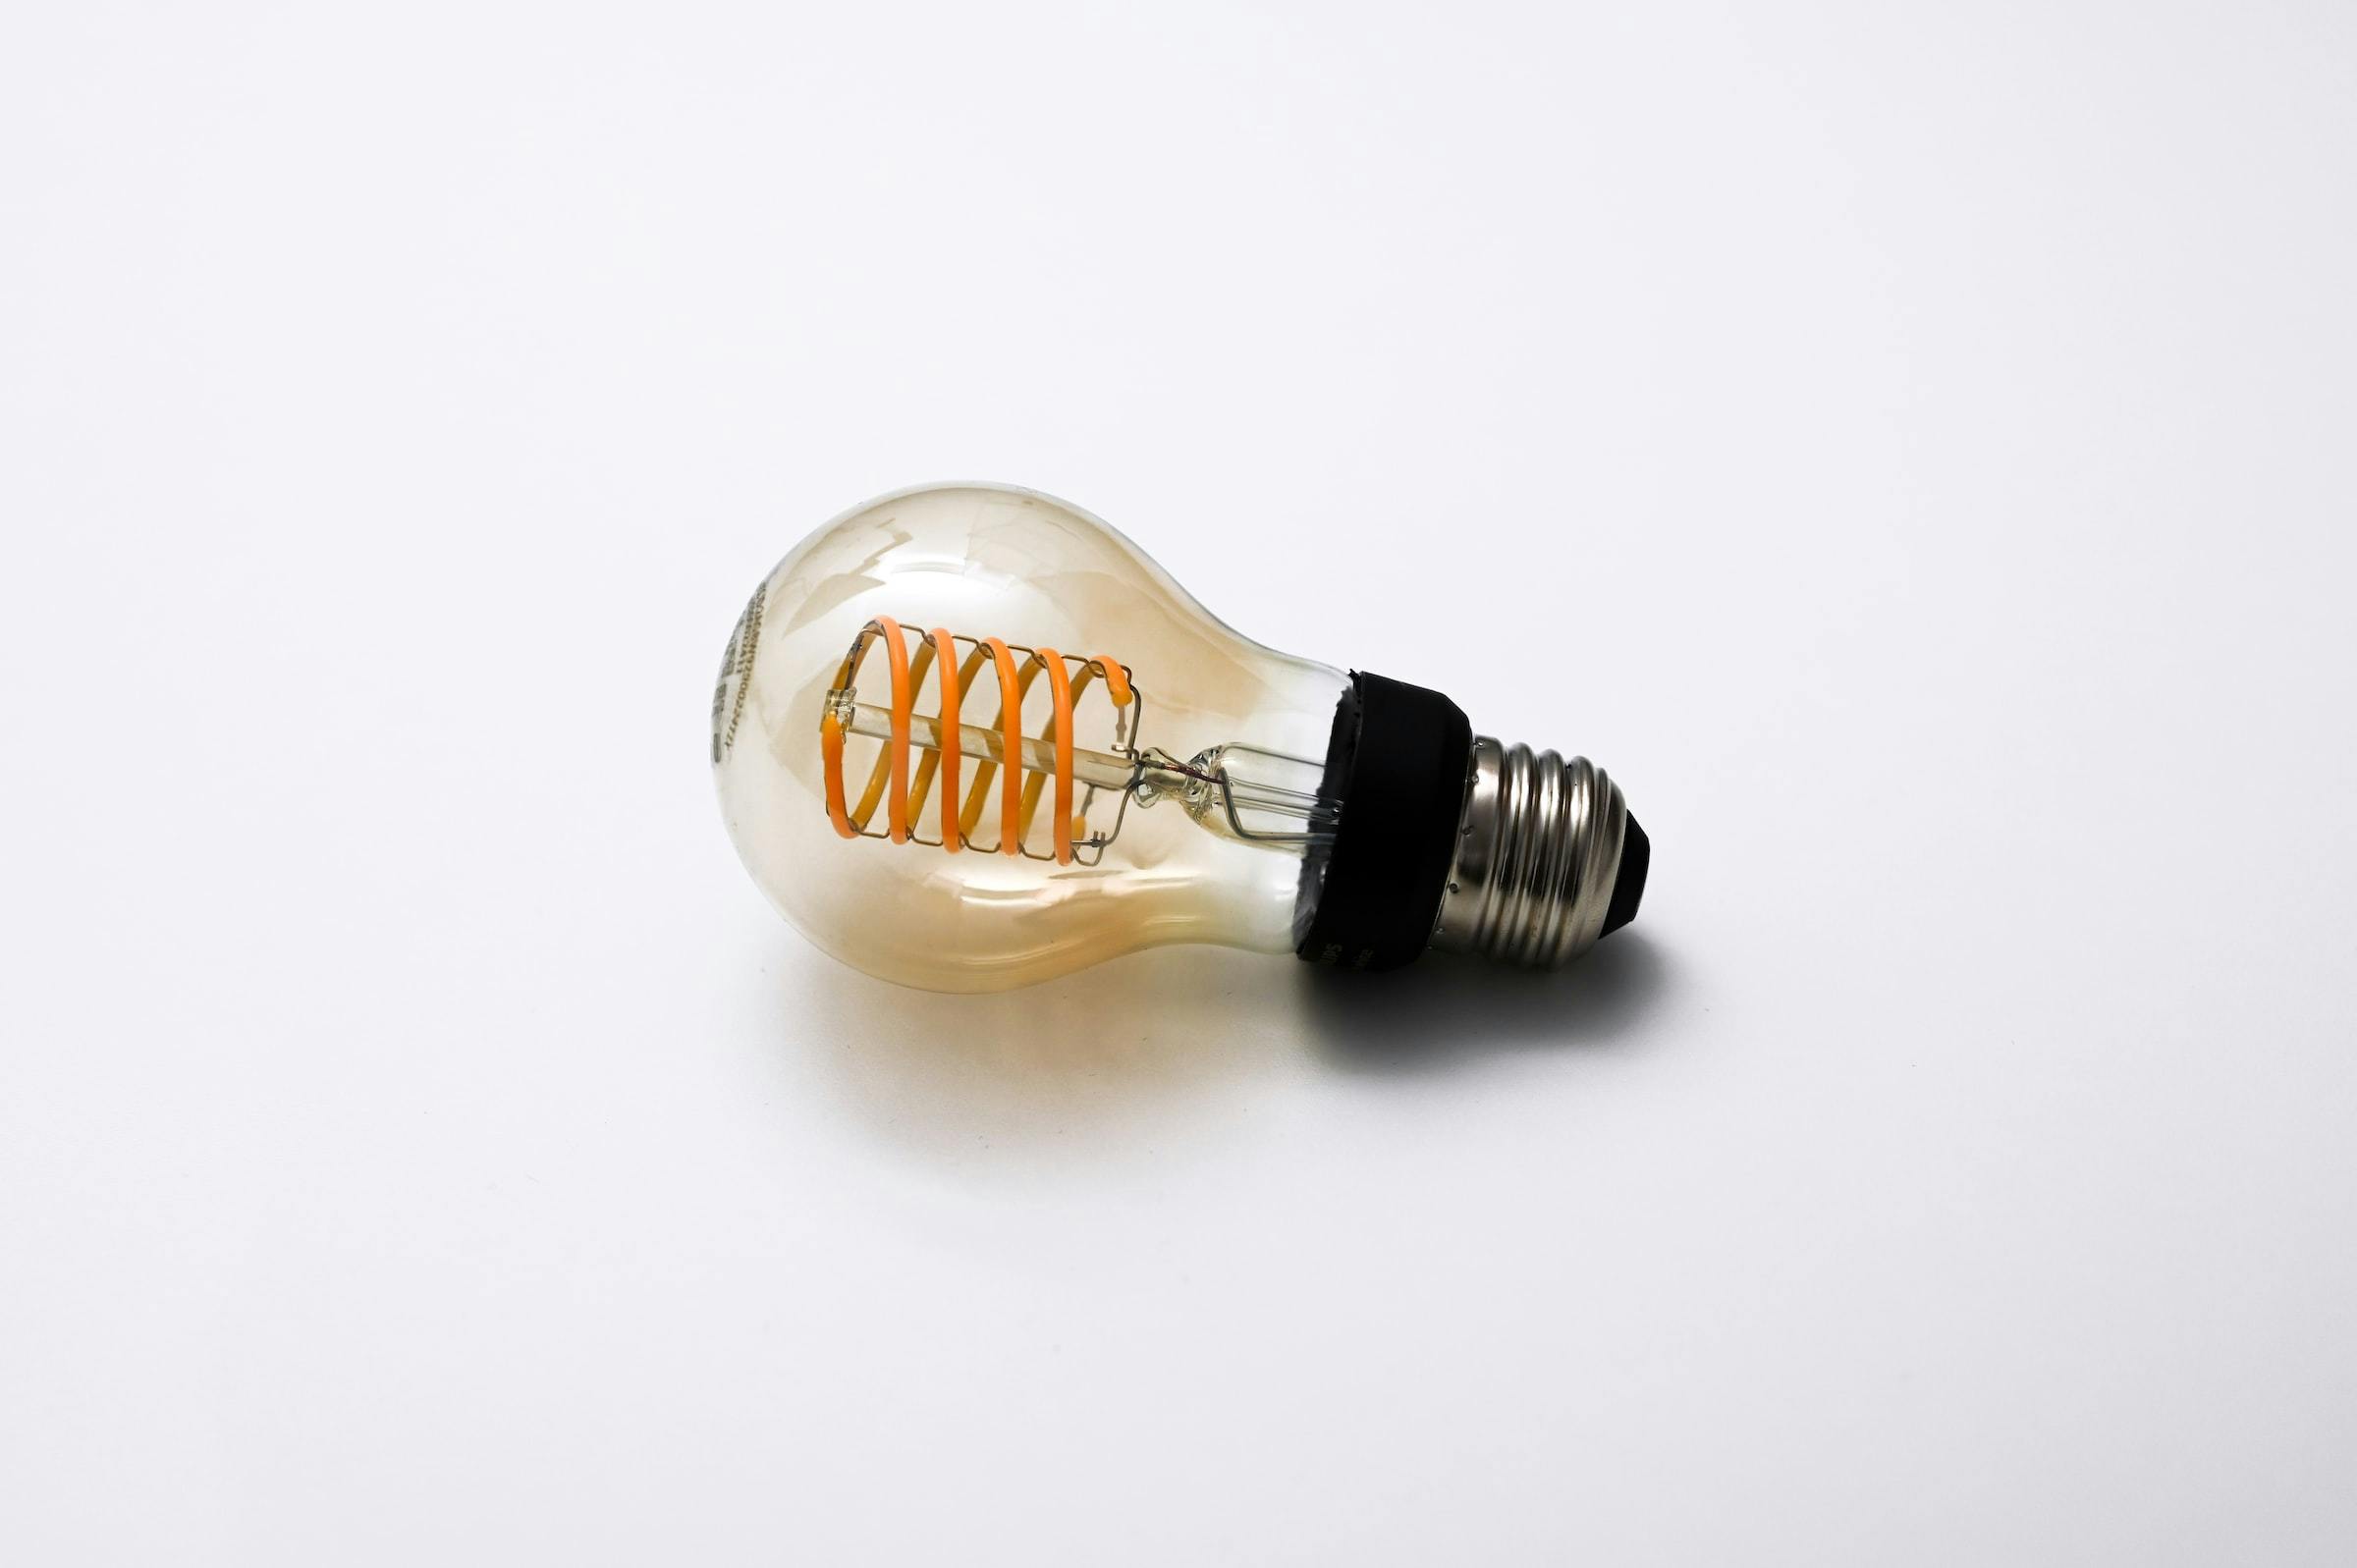 A light bulb that is turned on.